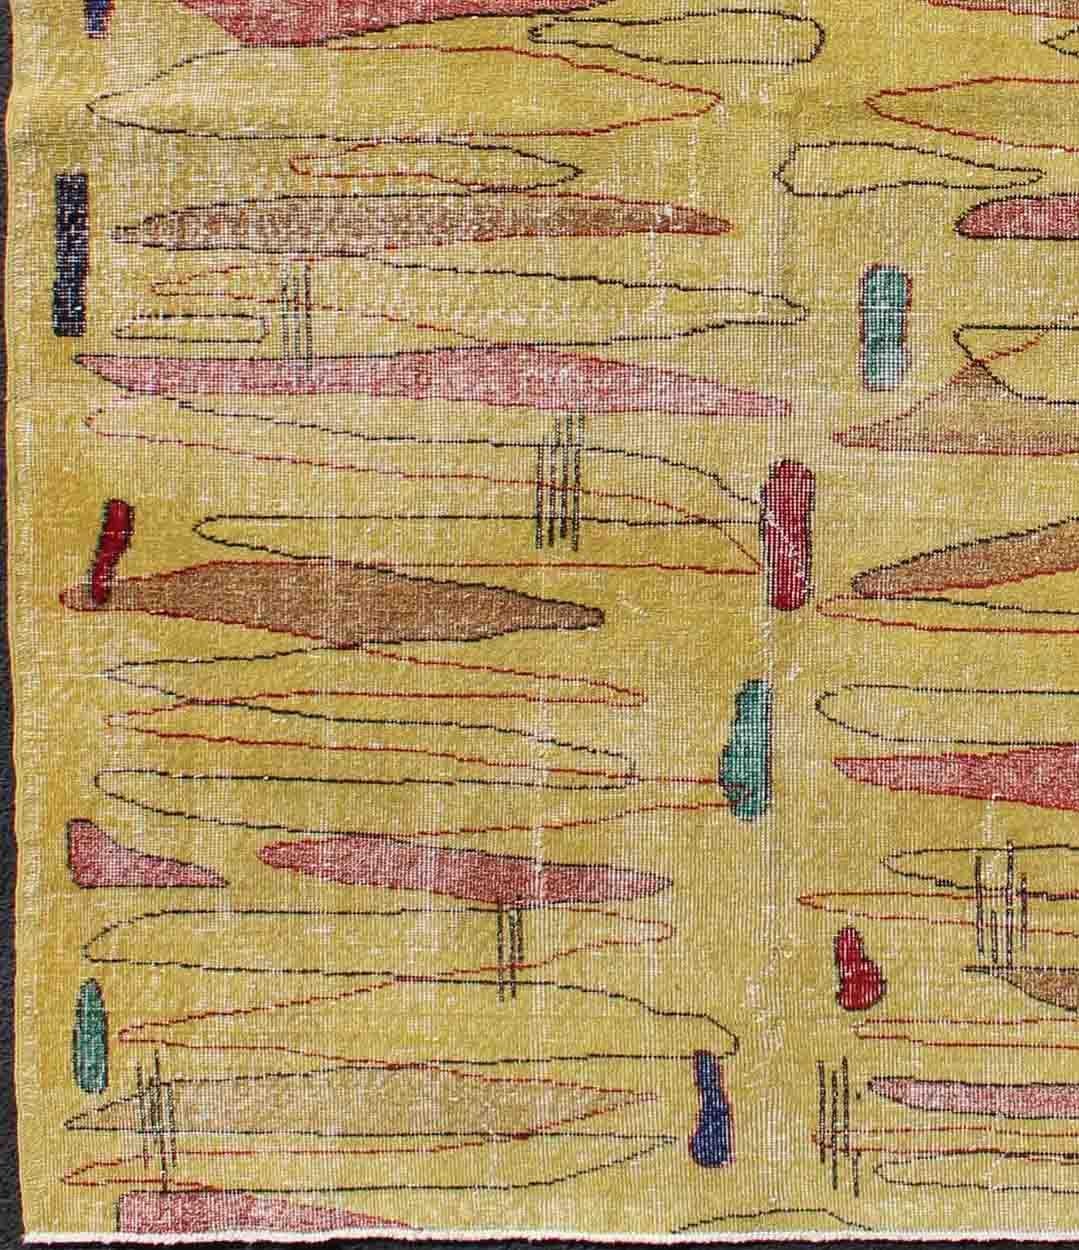 This beautiful Turkish Mid-Century Modern design piece from the 1960s features a yellow background with a unique, etched, multicolored pattern, being well-suited for any modern room or modern interiors.

Vintage Turkish Mid-Century Modern with